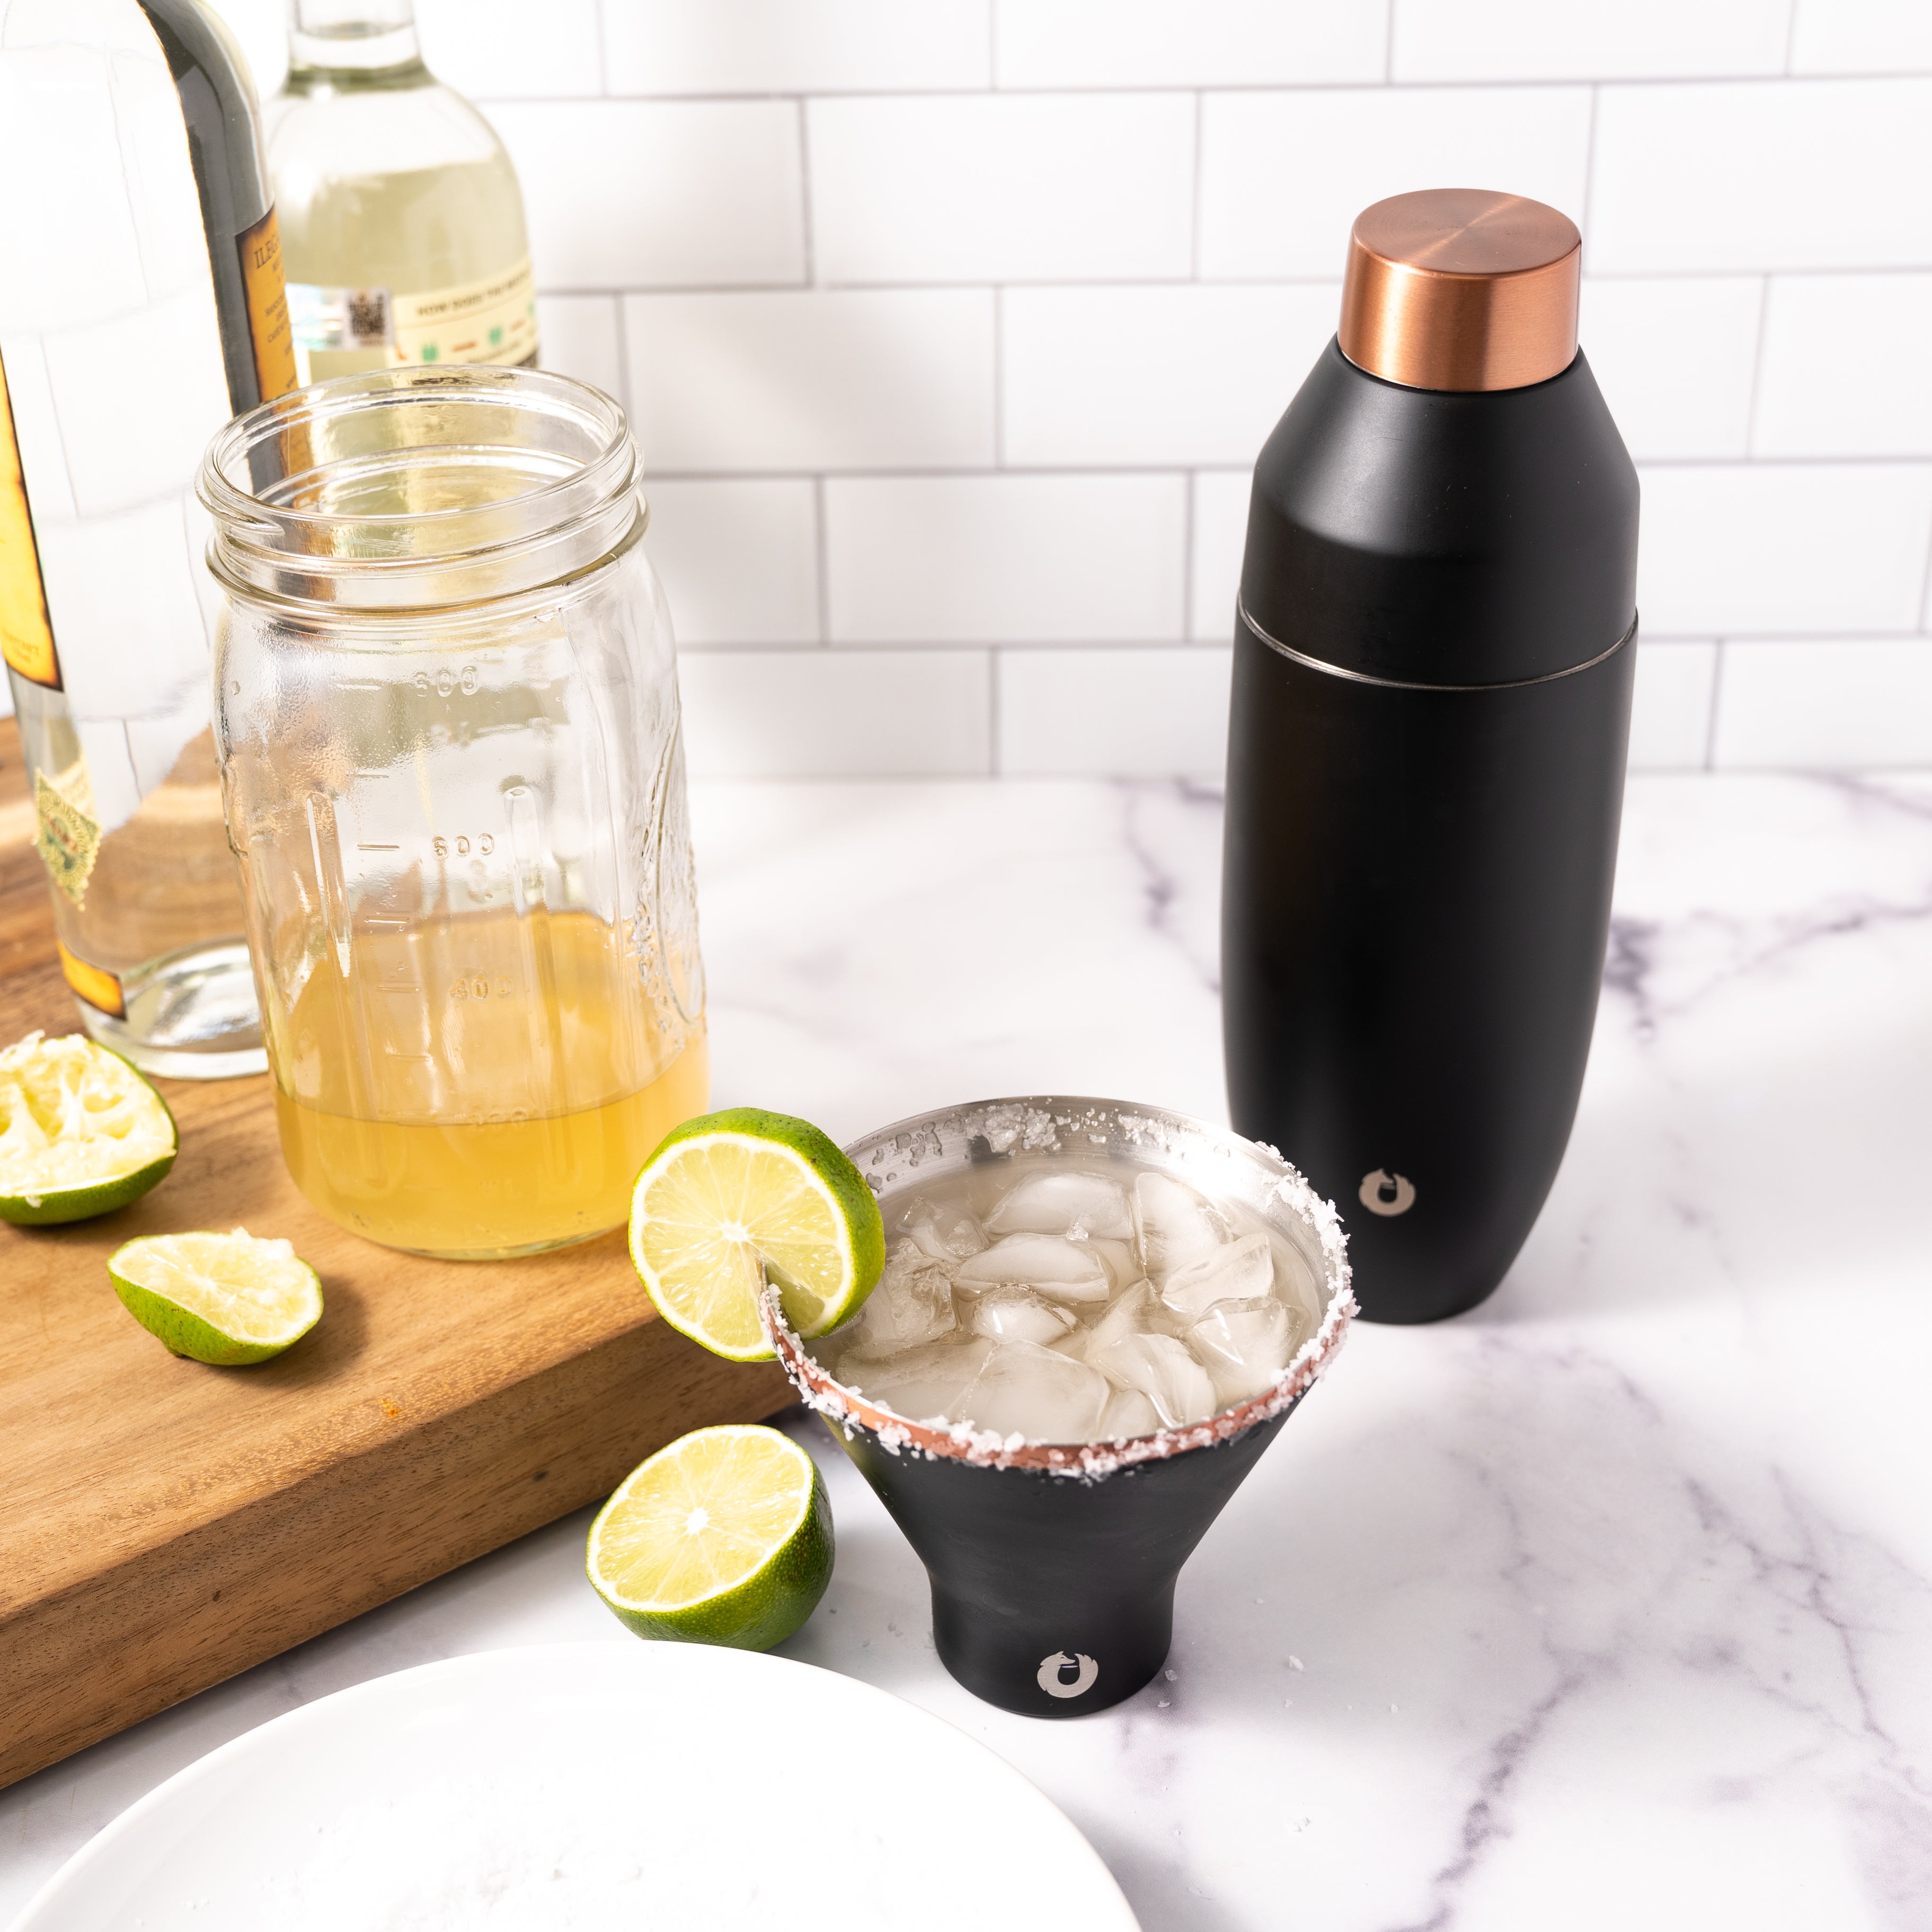 SnowFox – Stainless Steel Cocktail Shaker and Martini Glass